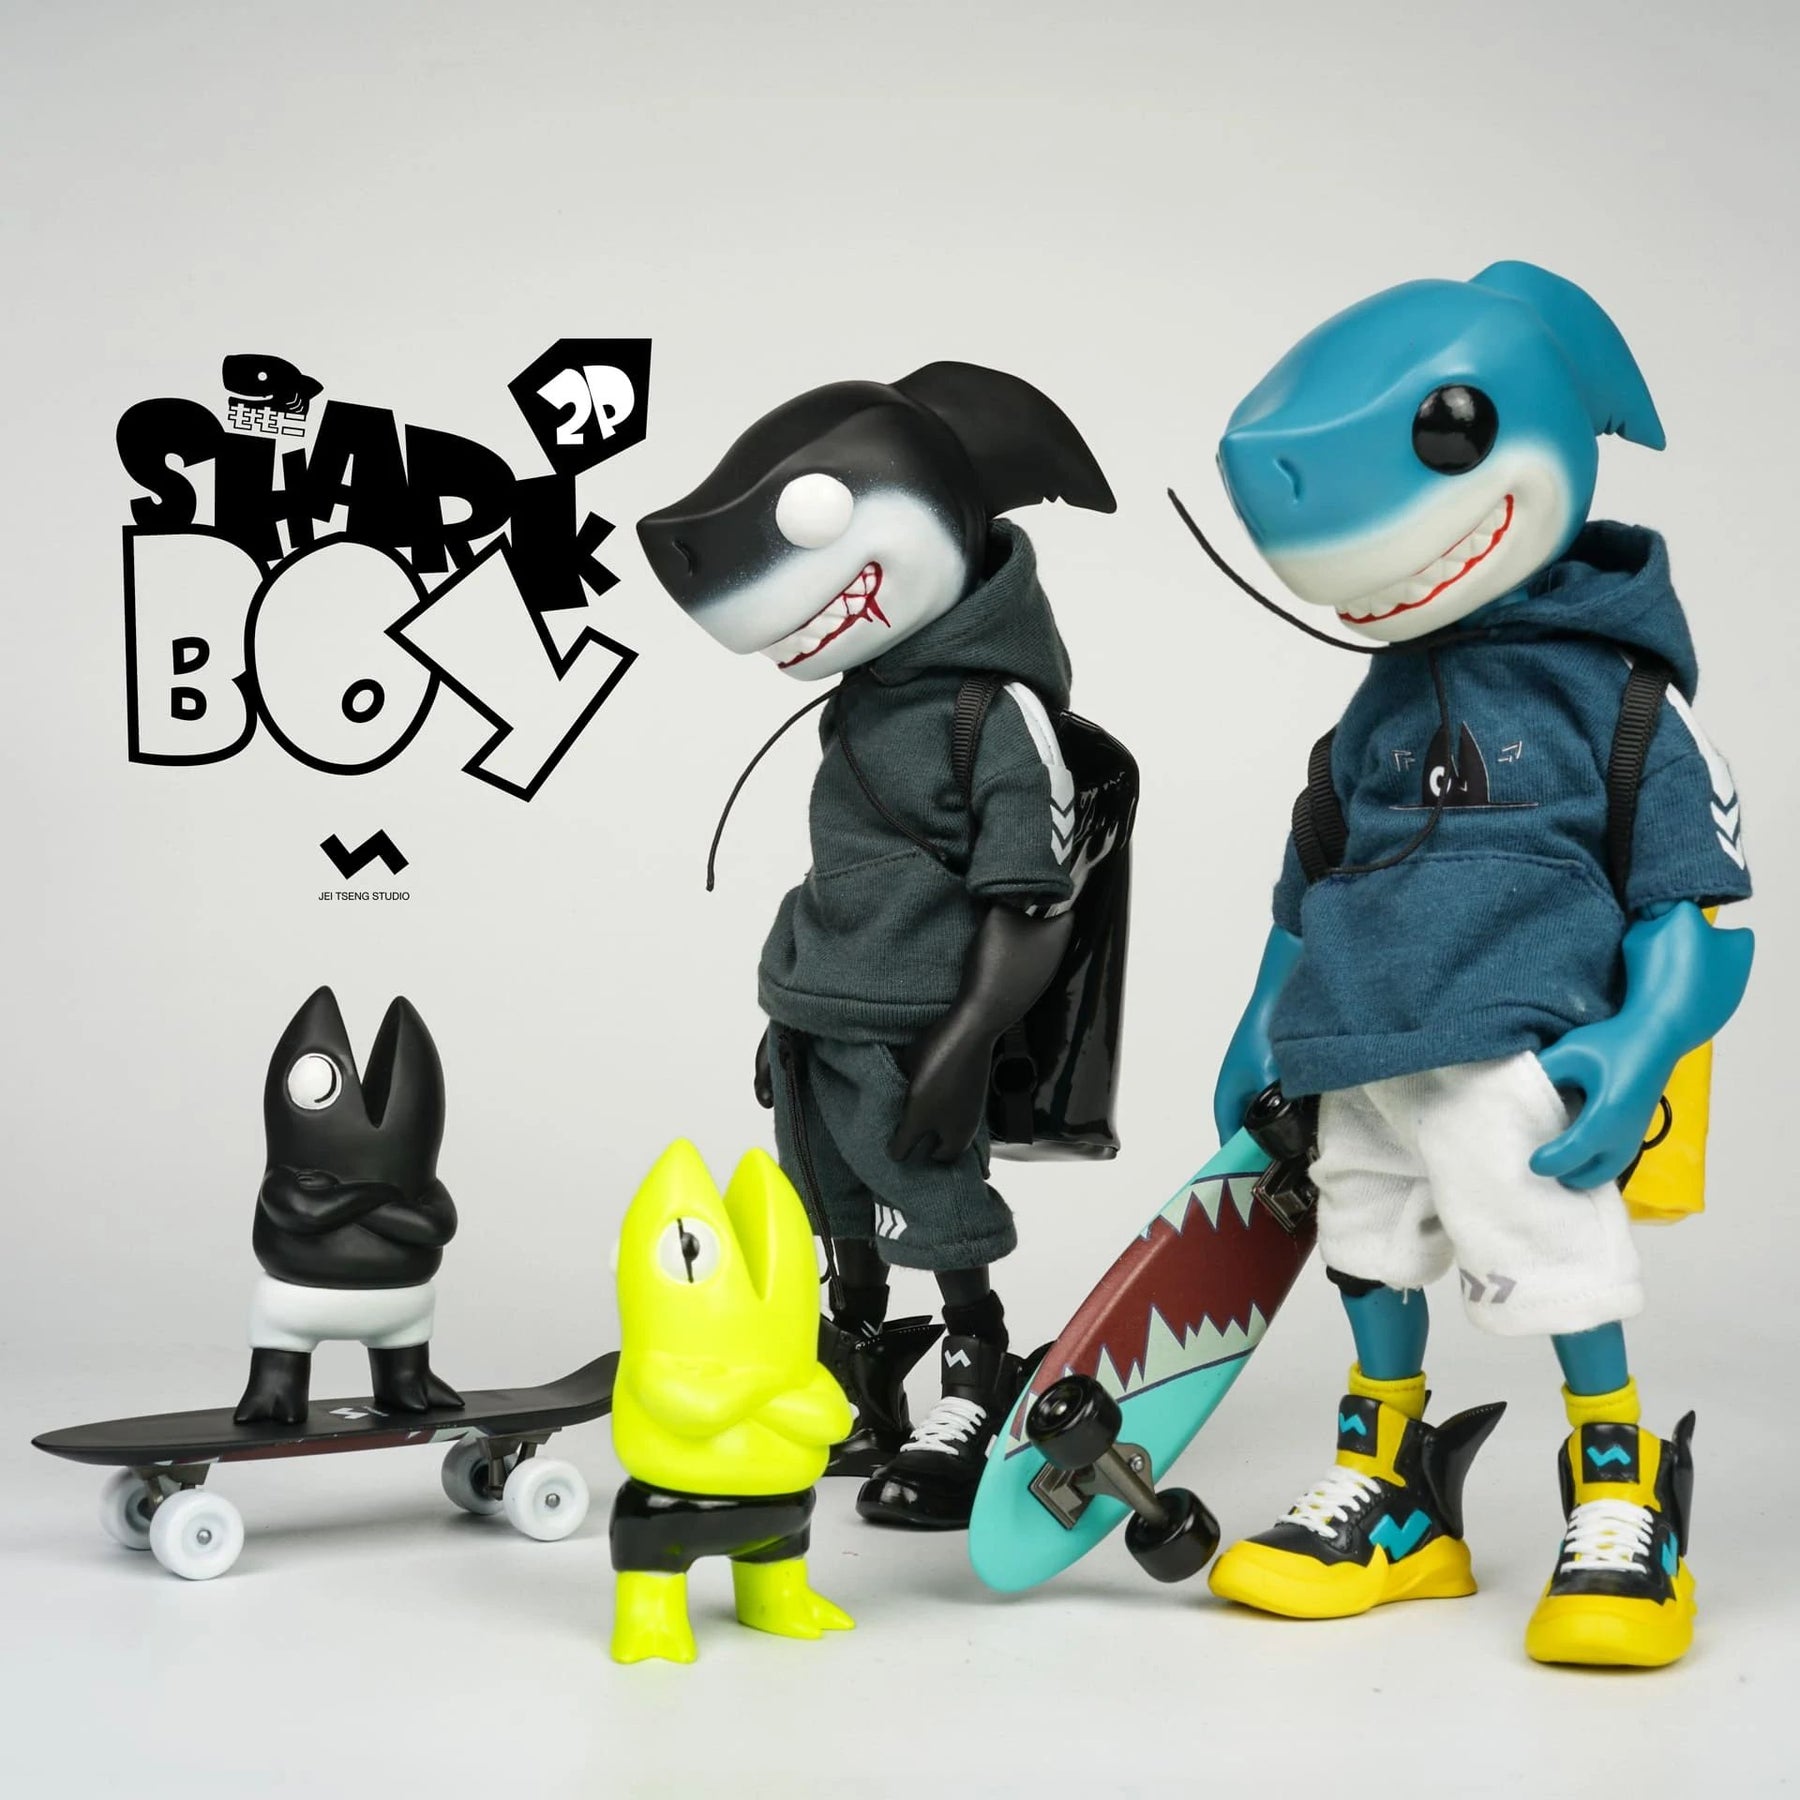 Preorder Shark Boy 2GO 2-Pack 8-inch action figures by Momoco x JT Studio